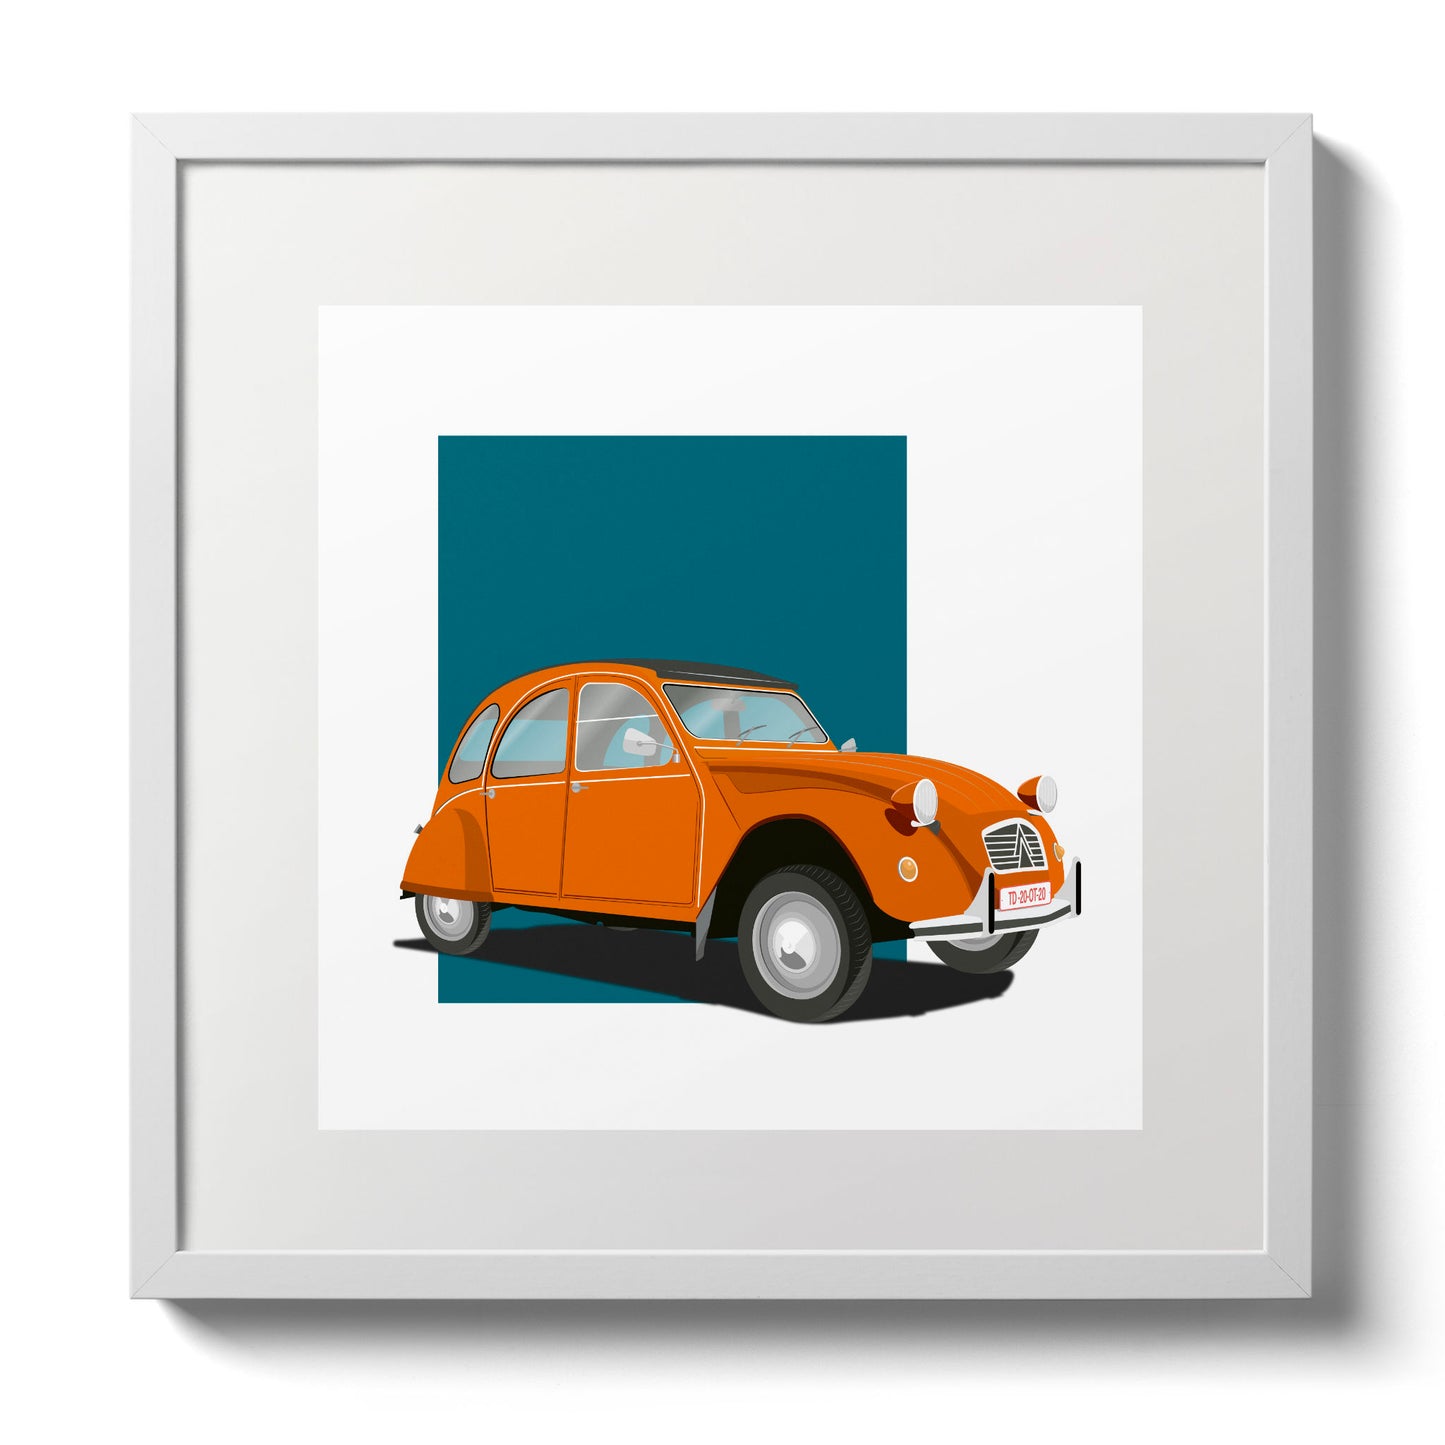 Illustration of an orange Citroën 2CV, in a white frame and measuring 30 by 30 cm